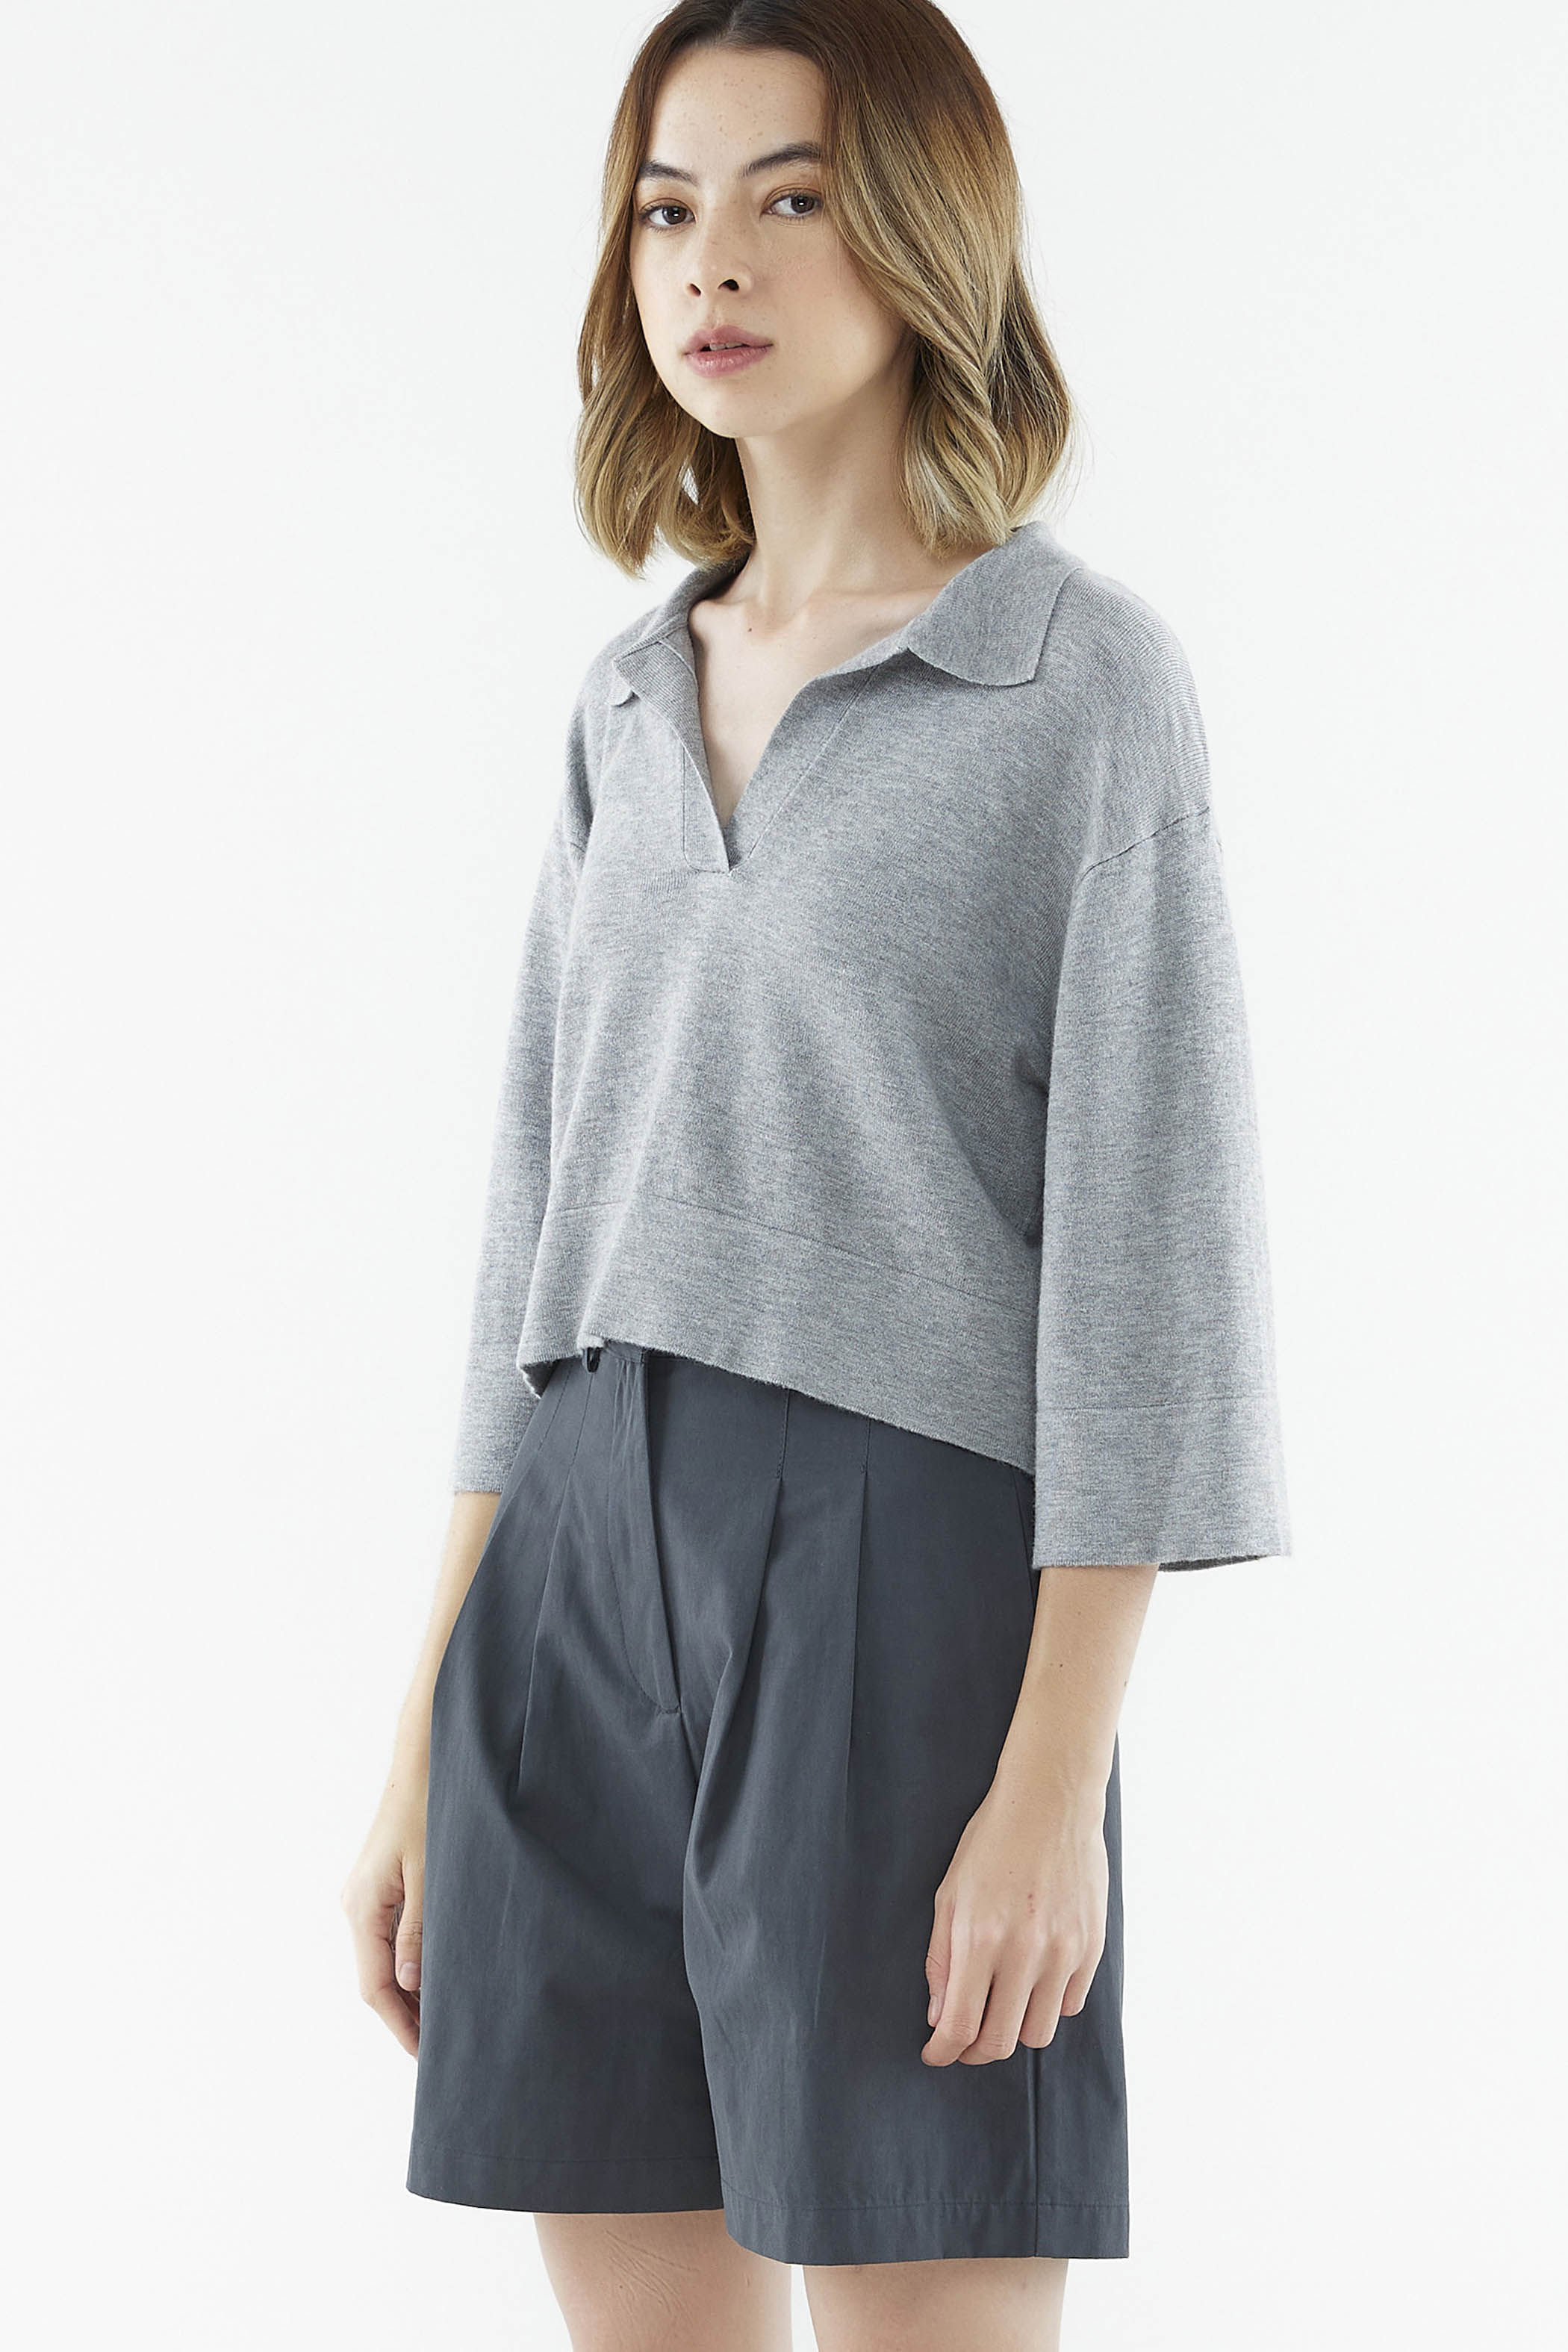 Maysen Collared Knit Top 